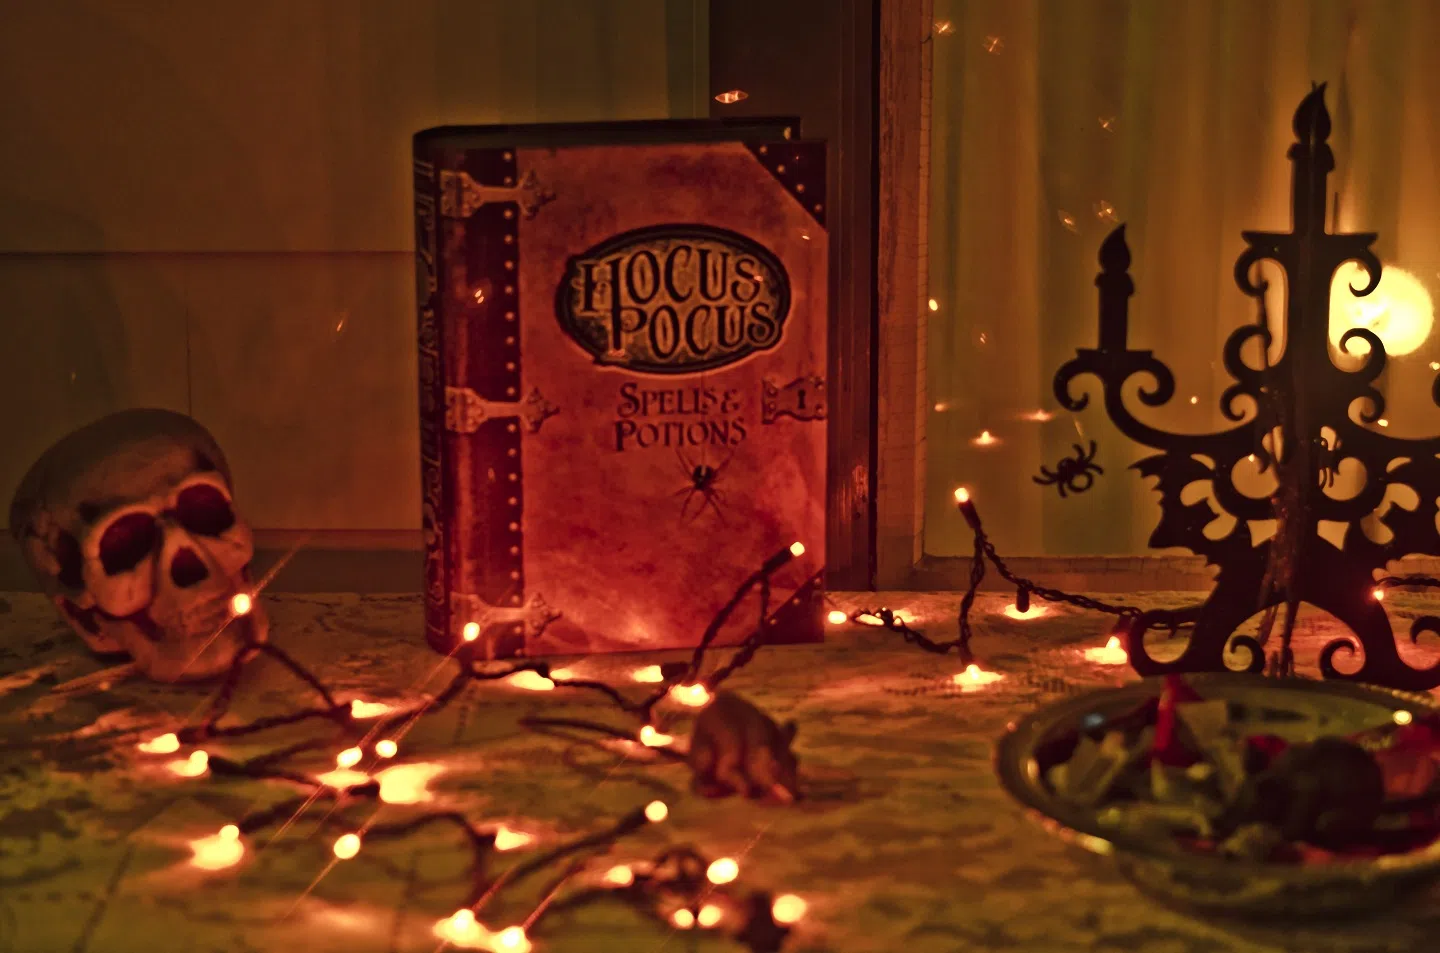 Spell Books and Potions